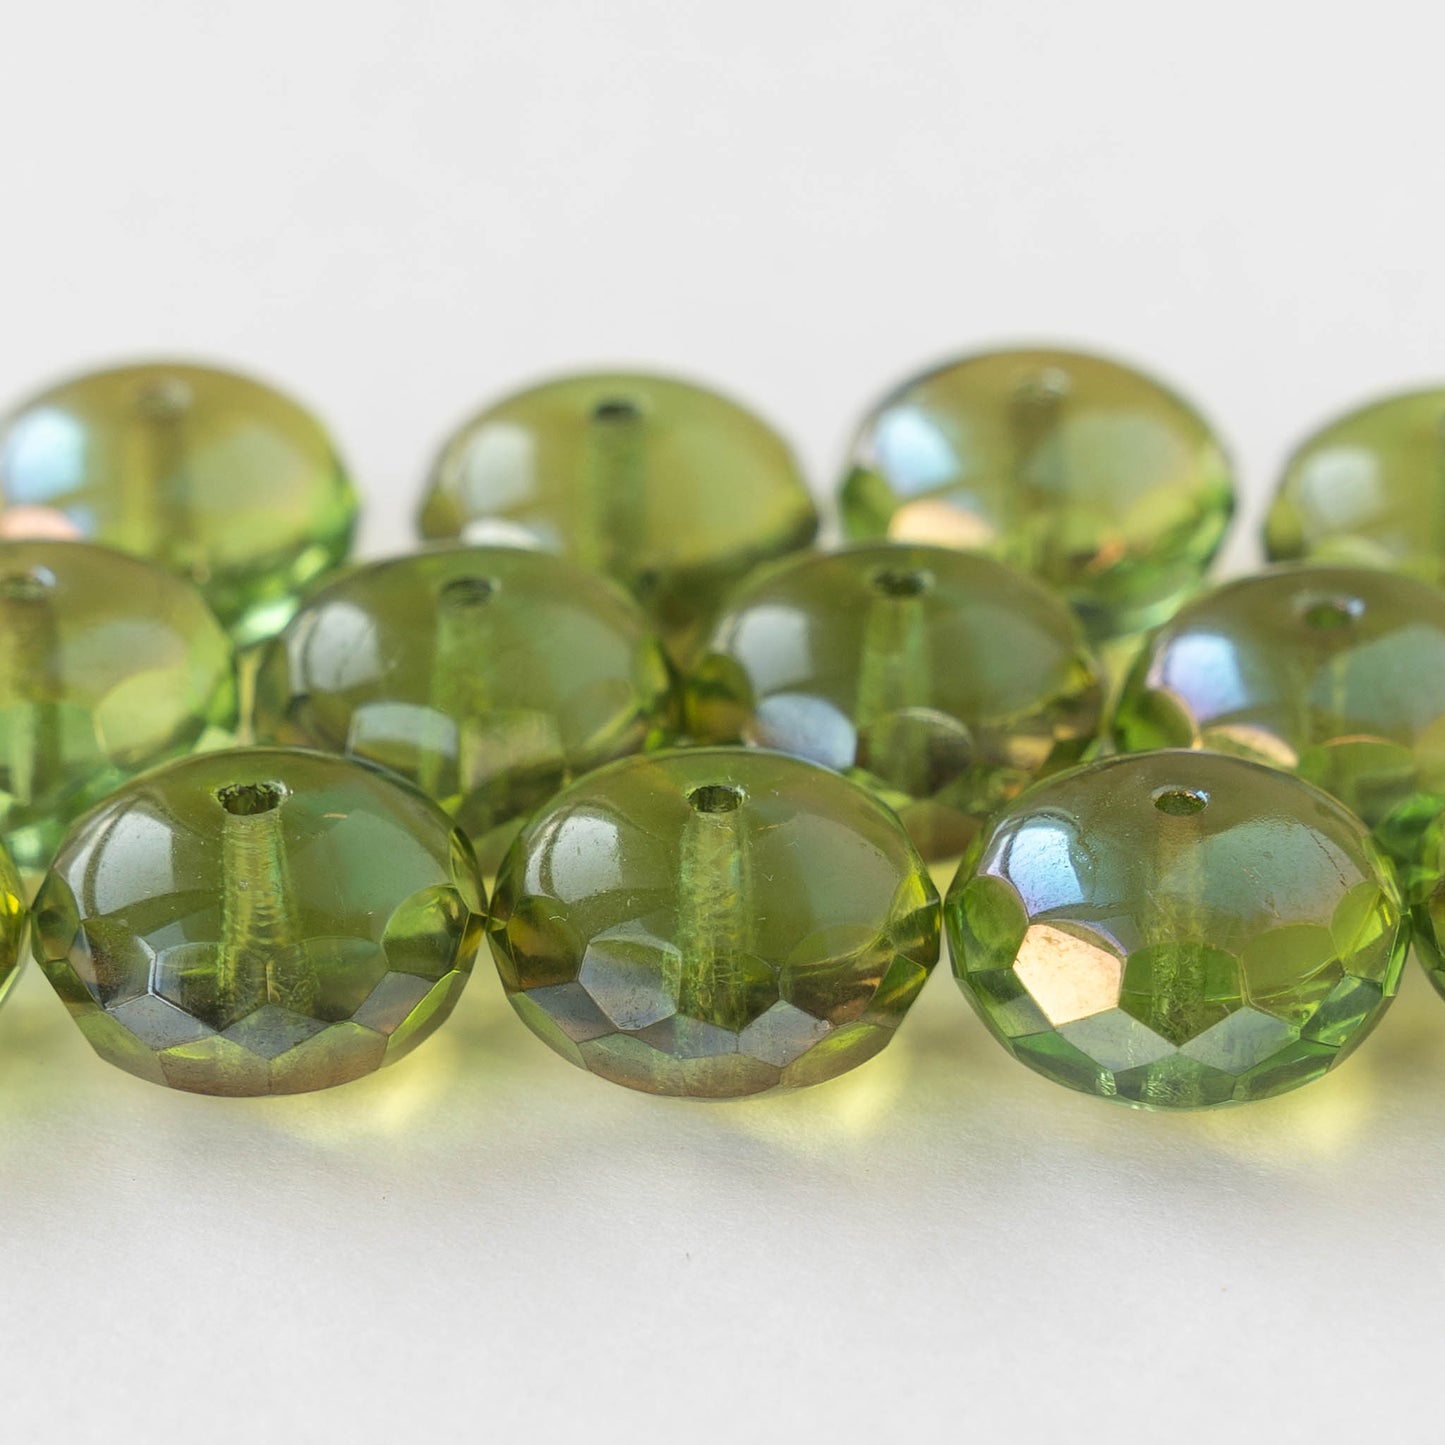 11x17mm Firepolished Rondelle Beads - Peridot Celsian - 4 or 12 Beads